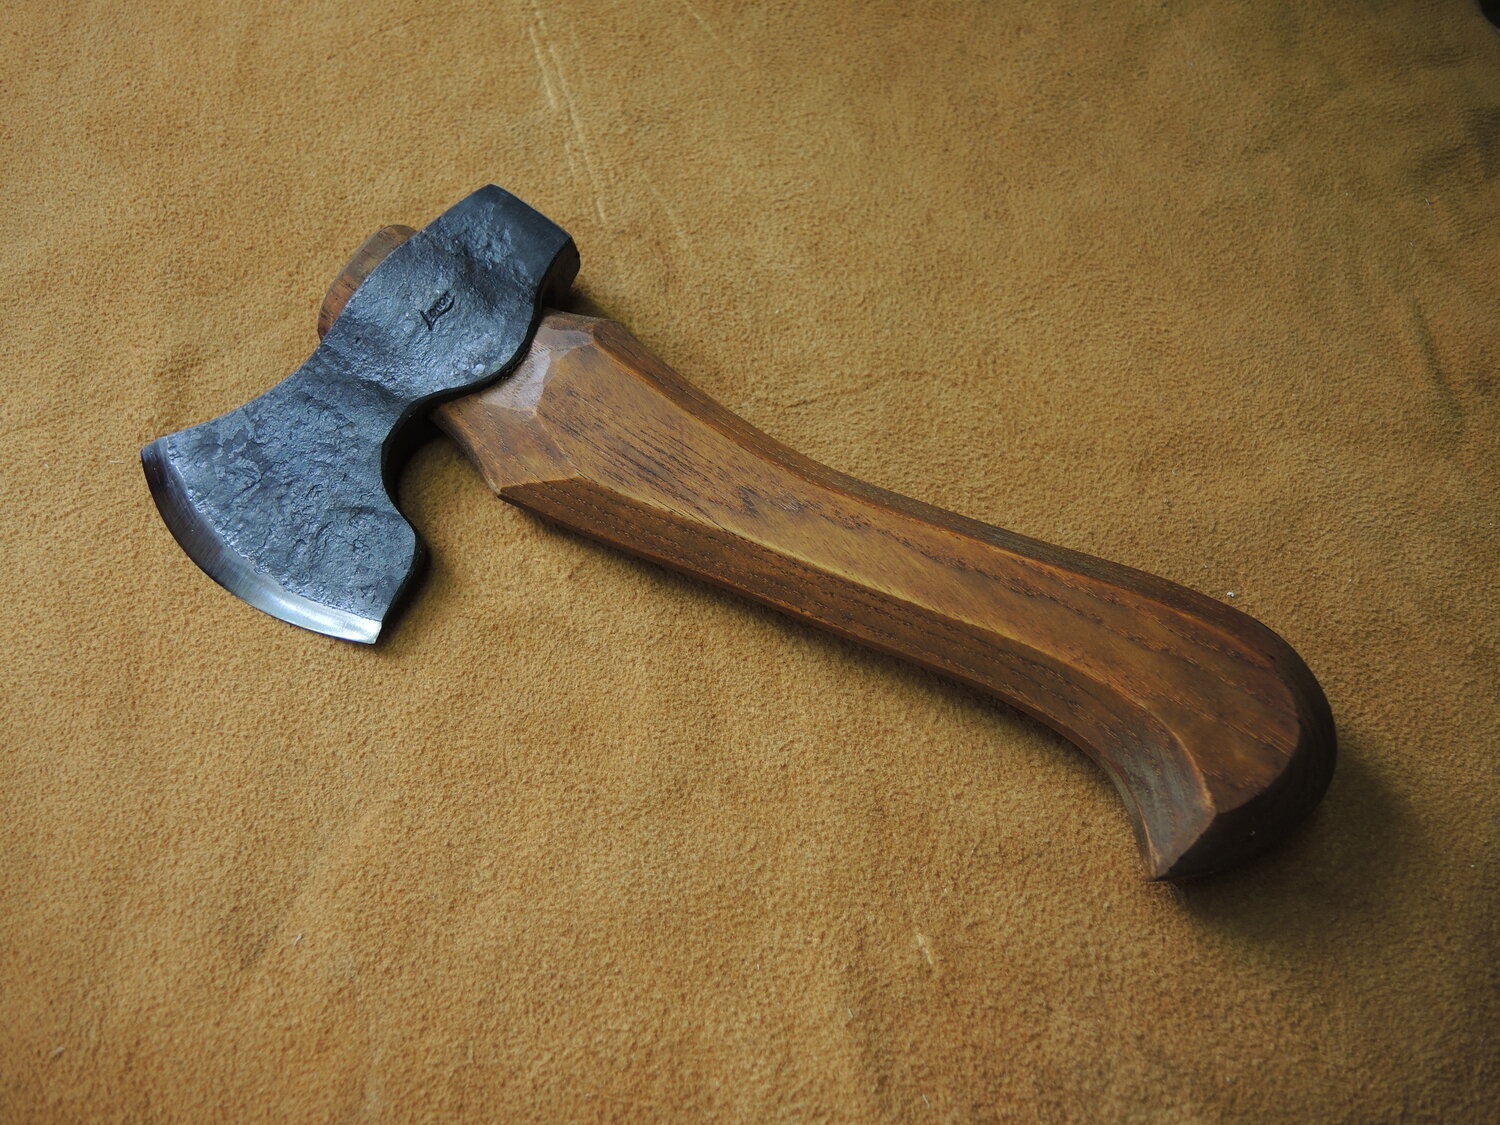 Small Finnish Carving Axe Smooth Handle, Little Carving Axe, Carvingtools,  Carbon Steel Tools, Spoon Carving 